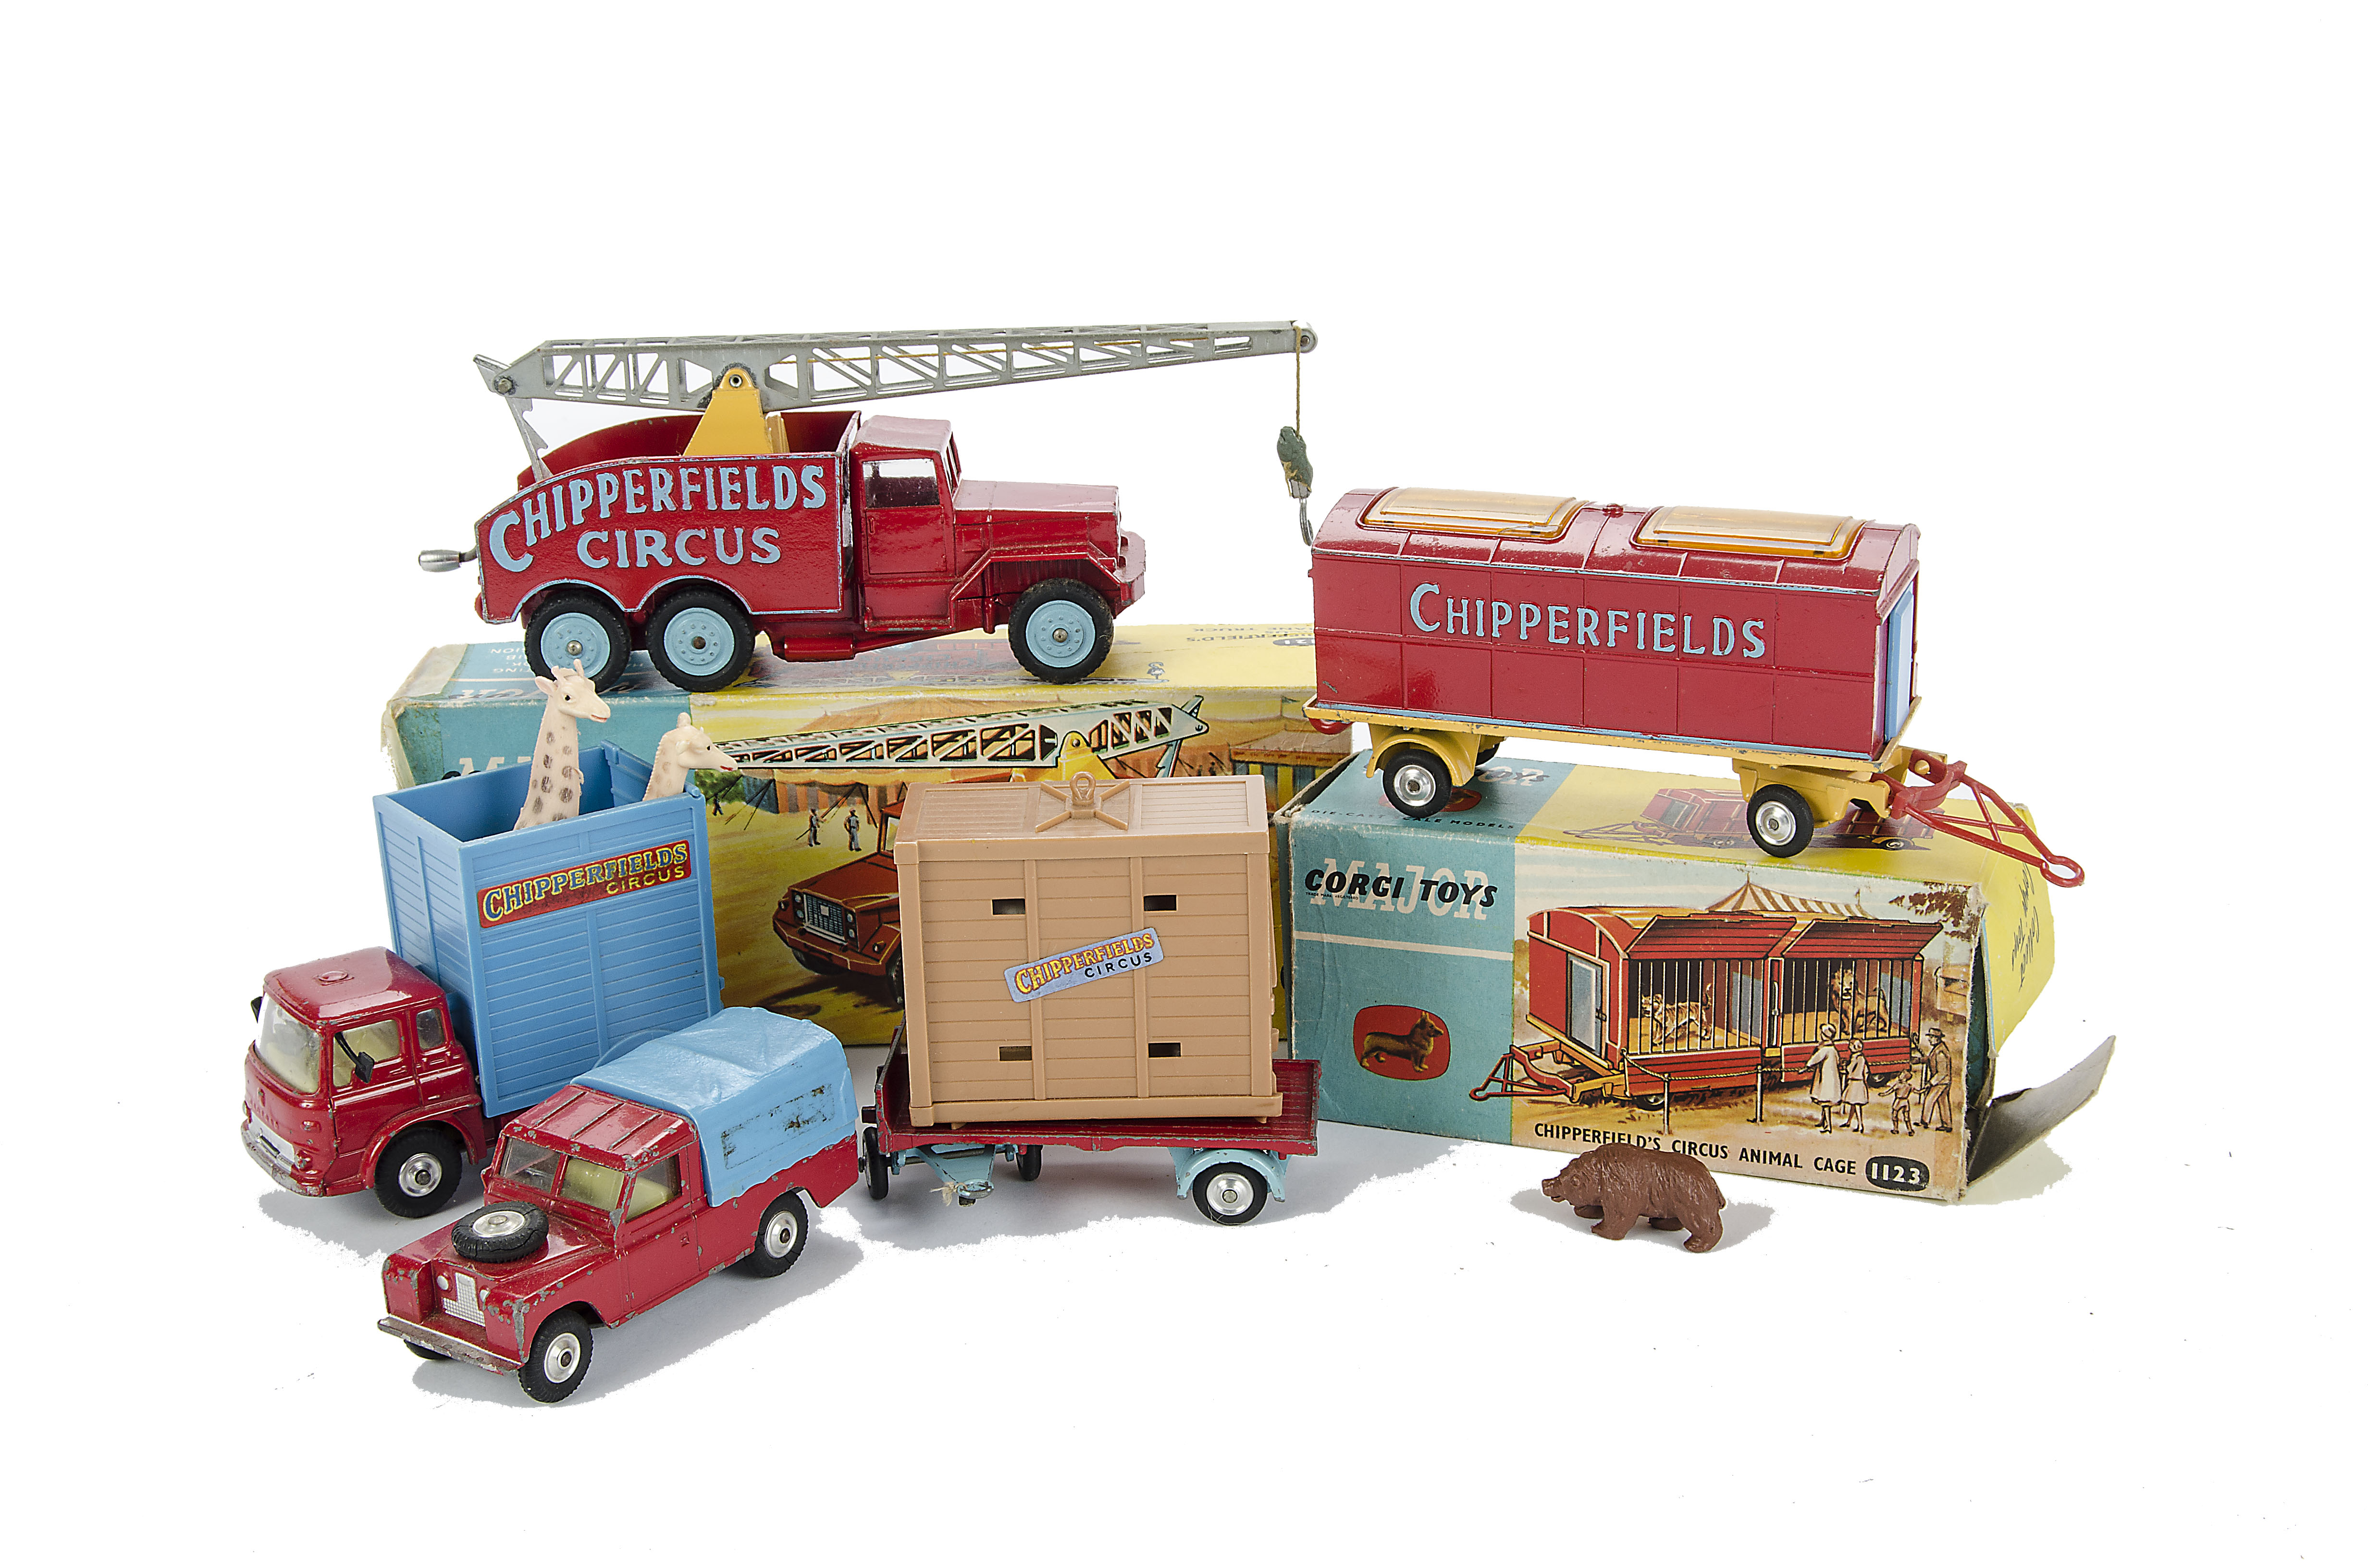 Corgi Toys Chipperfield's Circus 1121 Crane Truck, 1123 Animal Cage, in original boxes, loose